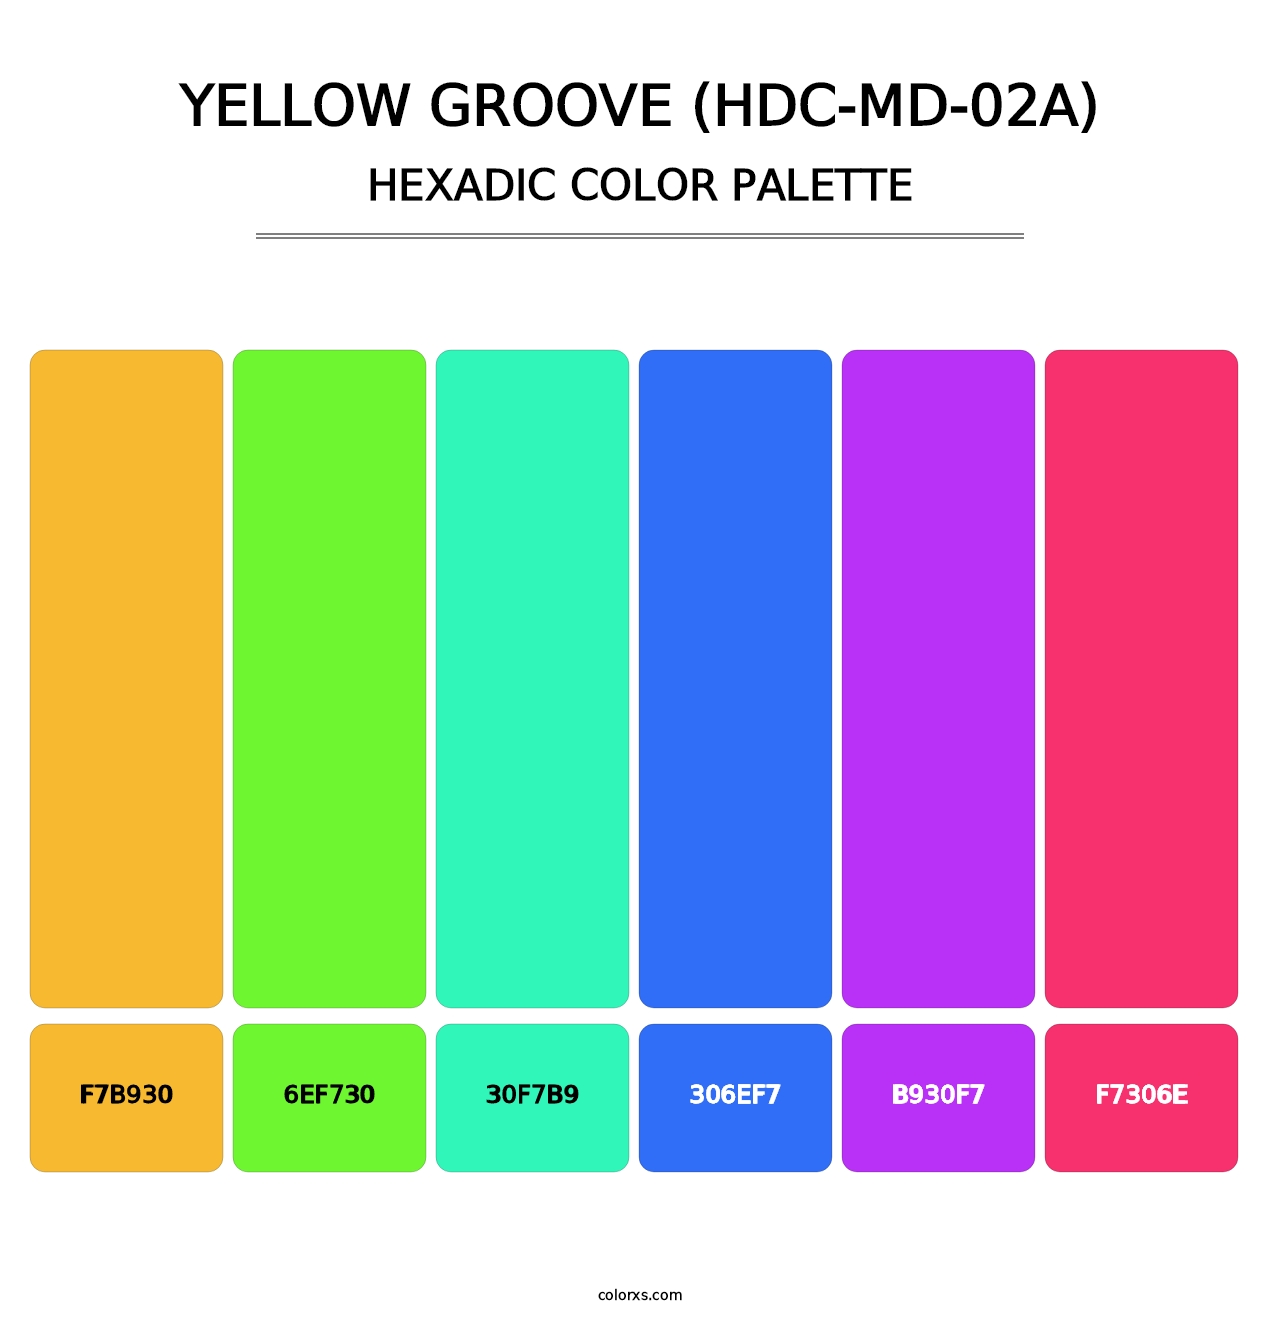 Yellow Groove (HDC-MD-02A) - Hexadic Color Palette